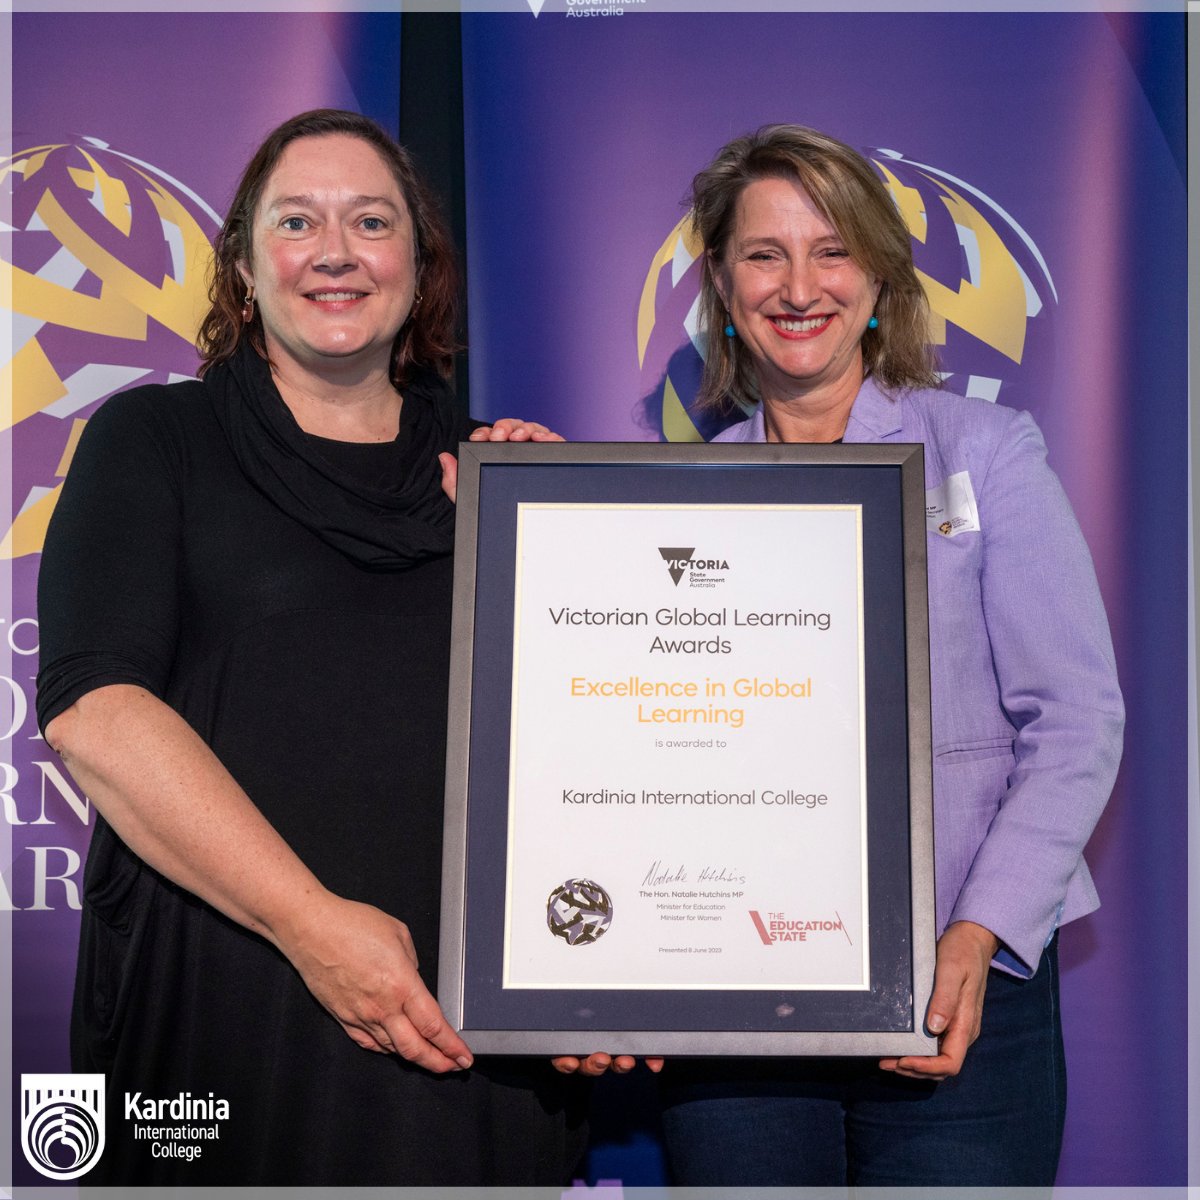 We are delighted to share we have won the Excellence in Global Learning Award for non-government schools at the Victorian Global Learning Awards, sponsored by the Victorian Department of Education. Thanks to all our staff, students and homestay families!